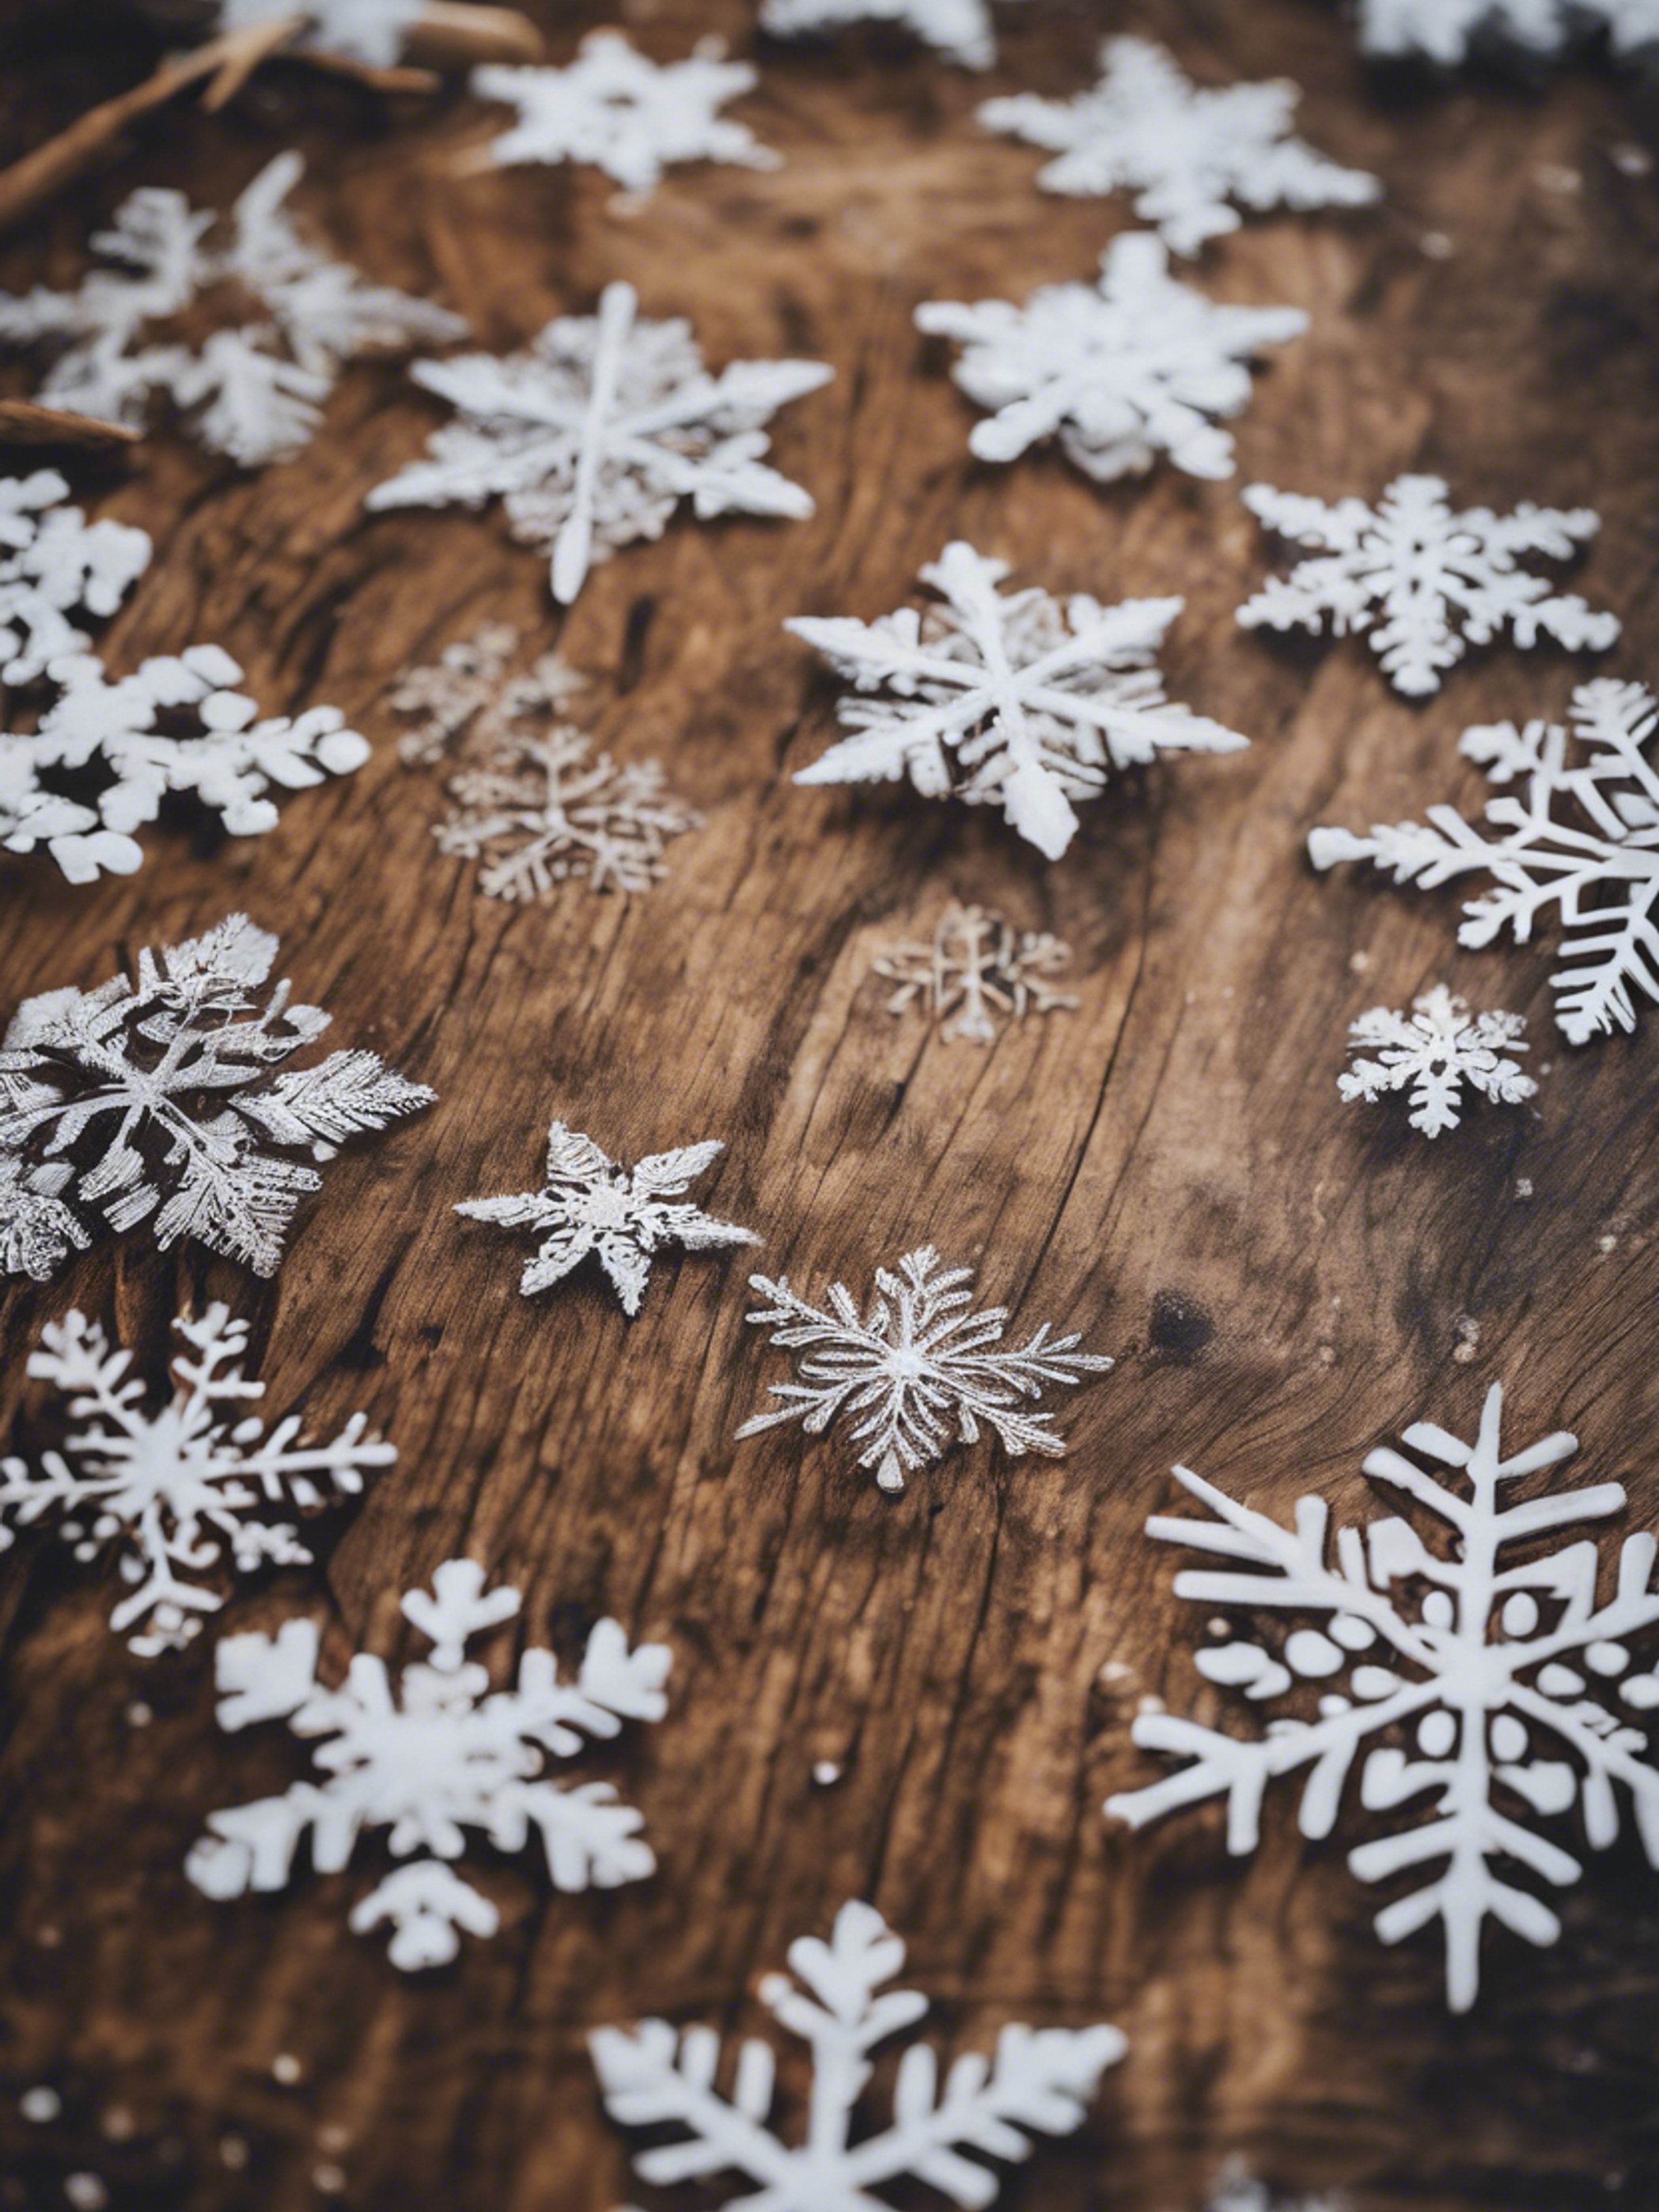 Snowflakes creating a beautiful pattern on a wooden tabletop.壁紙[7d0fdac325ca414bb9ff]